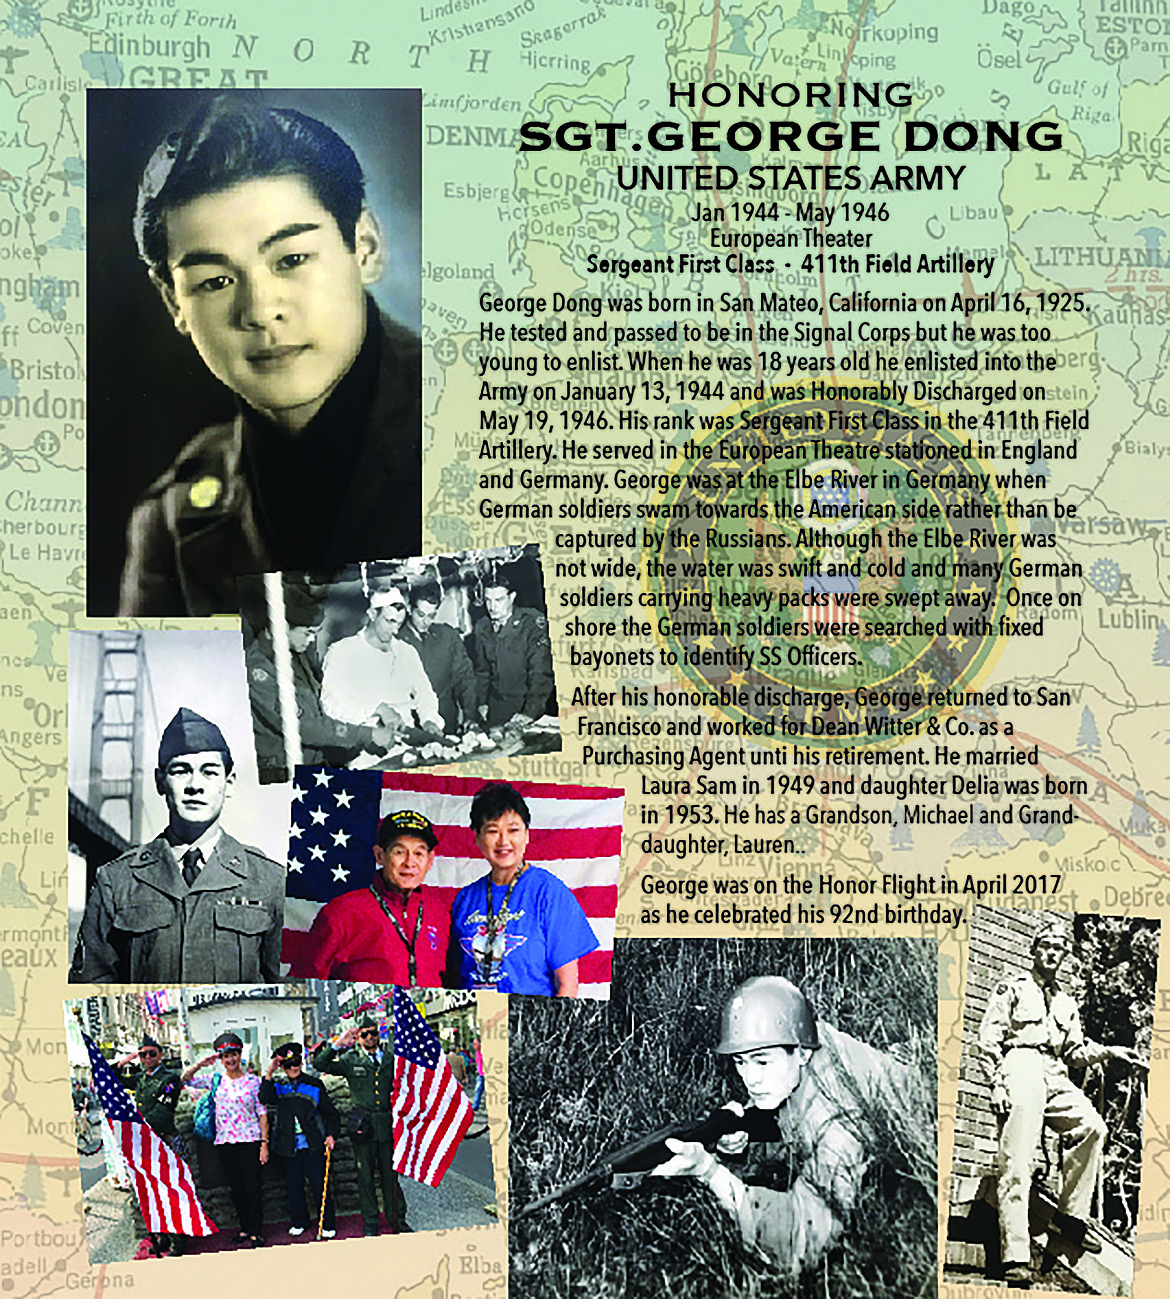 A tribute created for George Dong by his family and showing his military service.